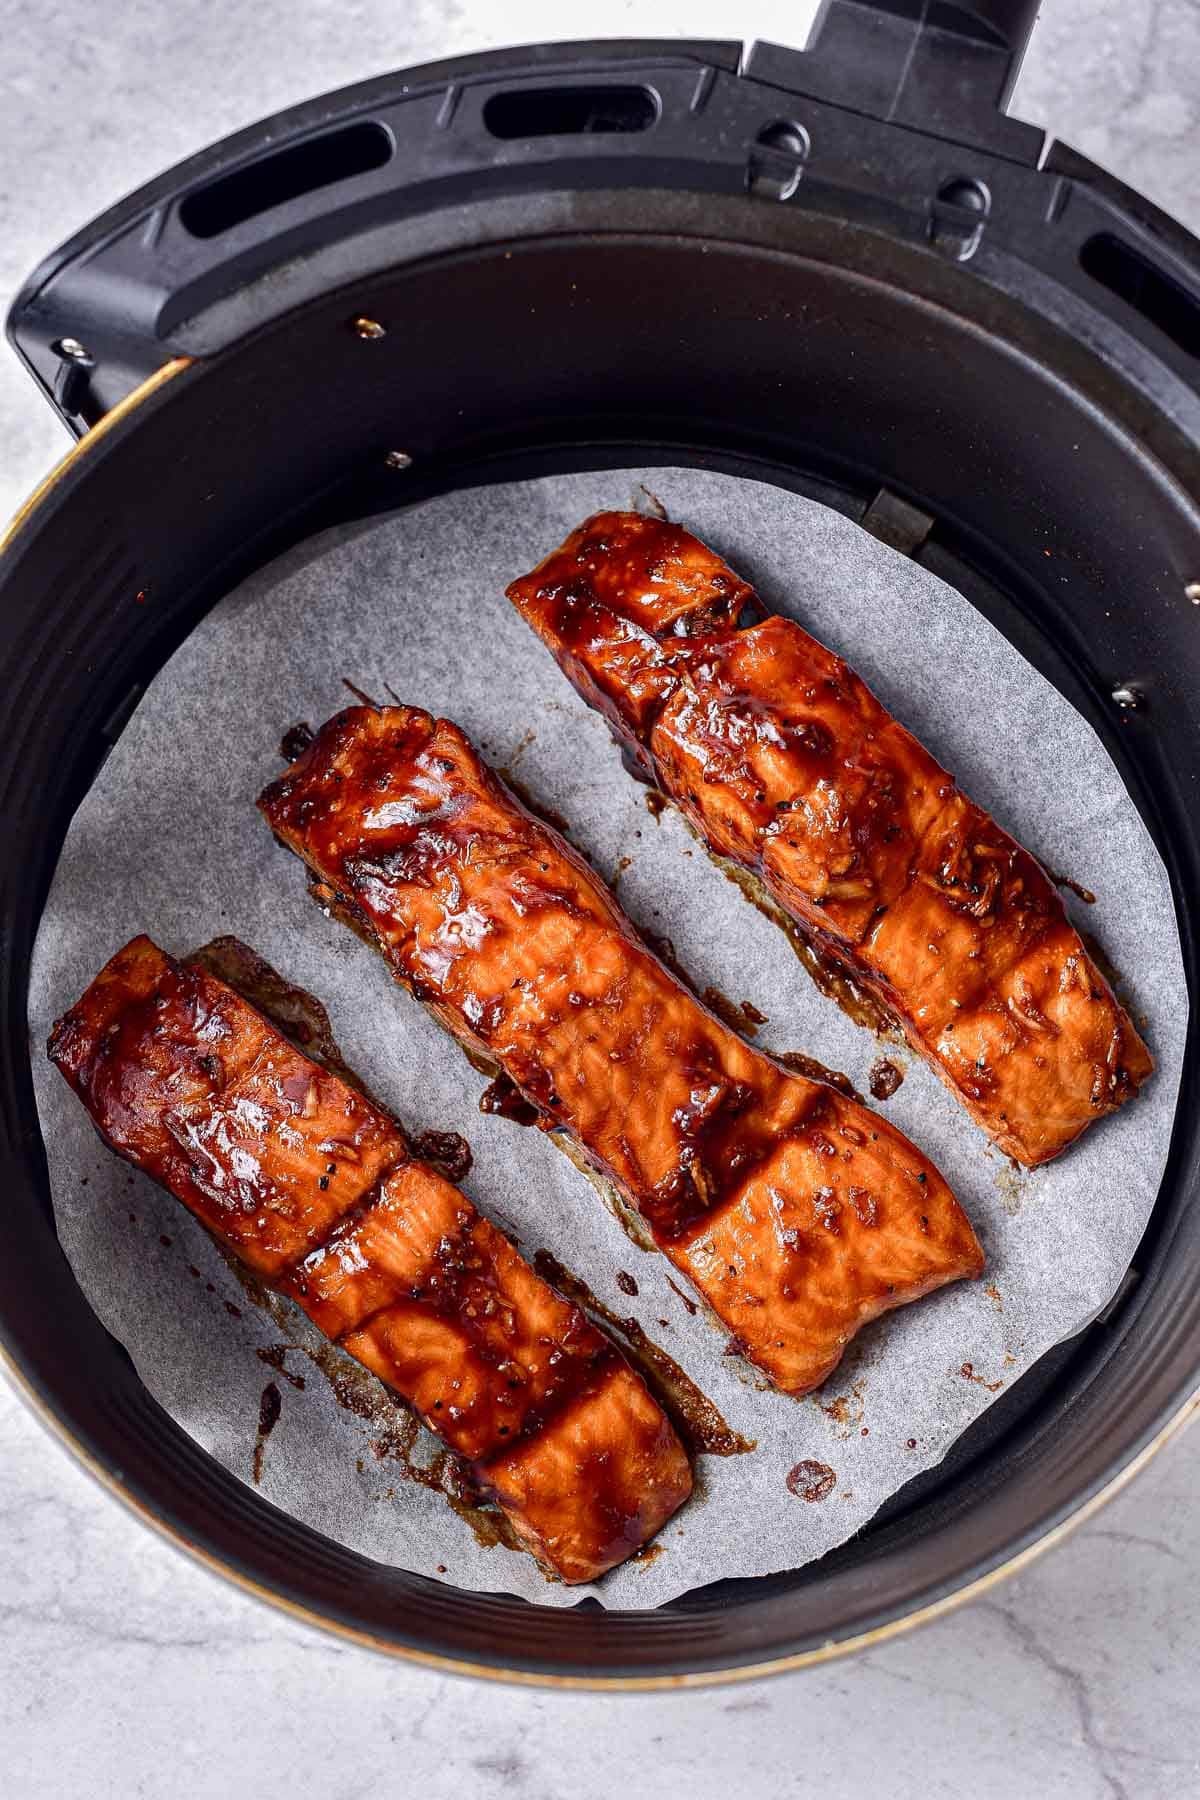 cooked teriyaki salmon on parchment paper in air fryer basket on counter.